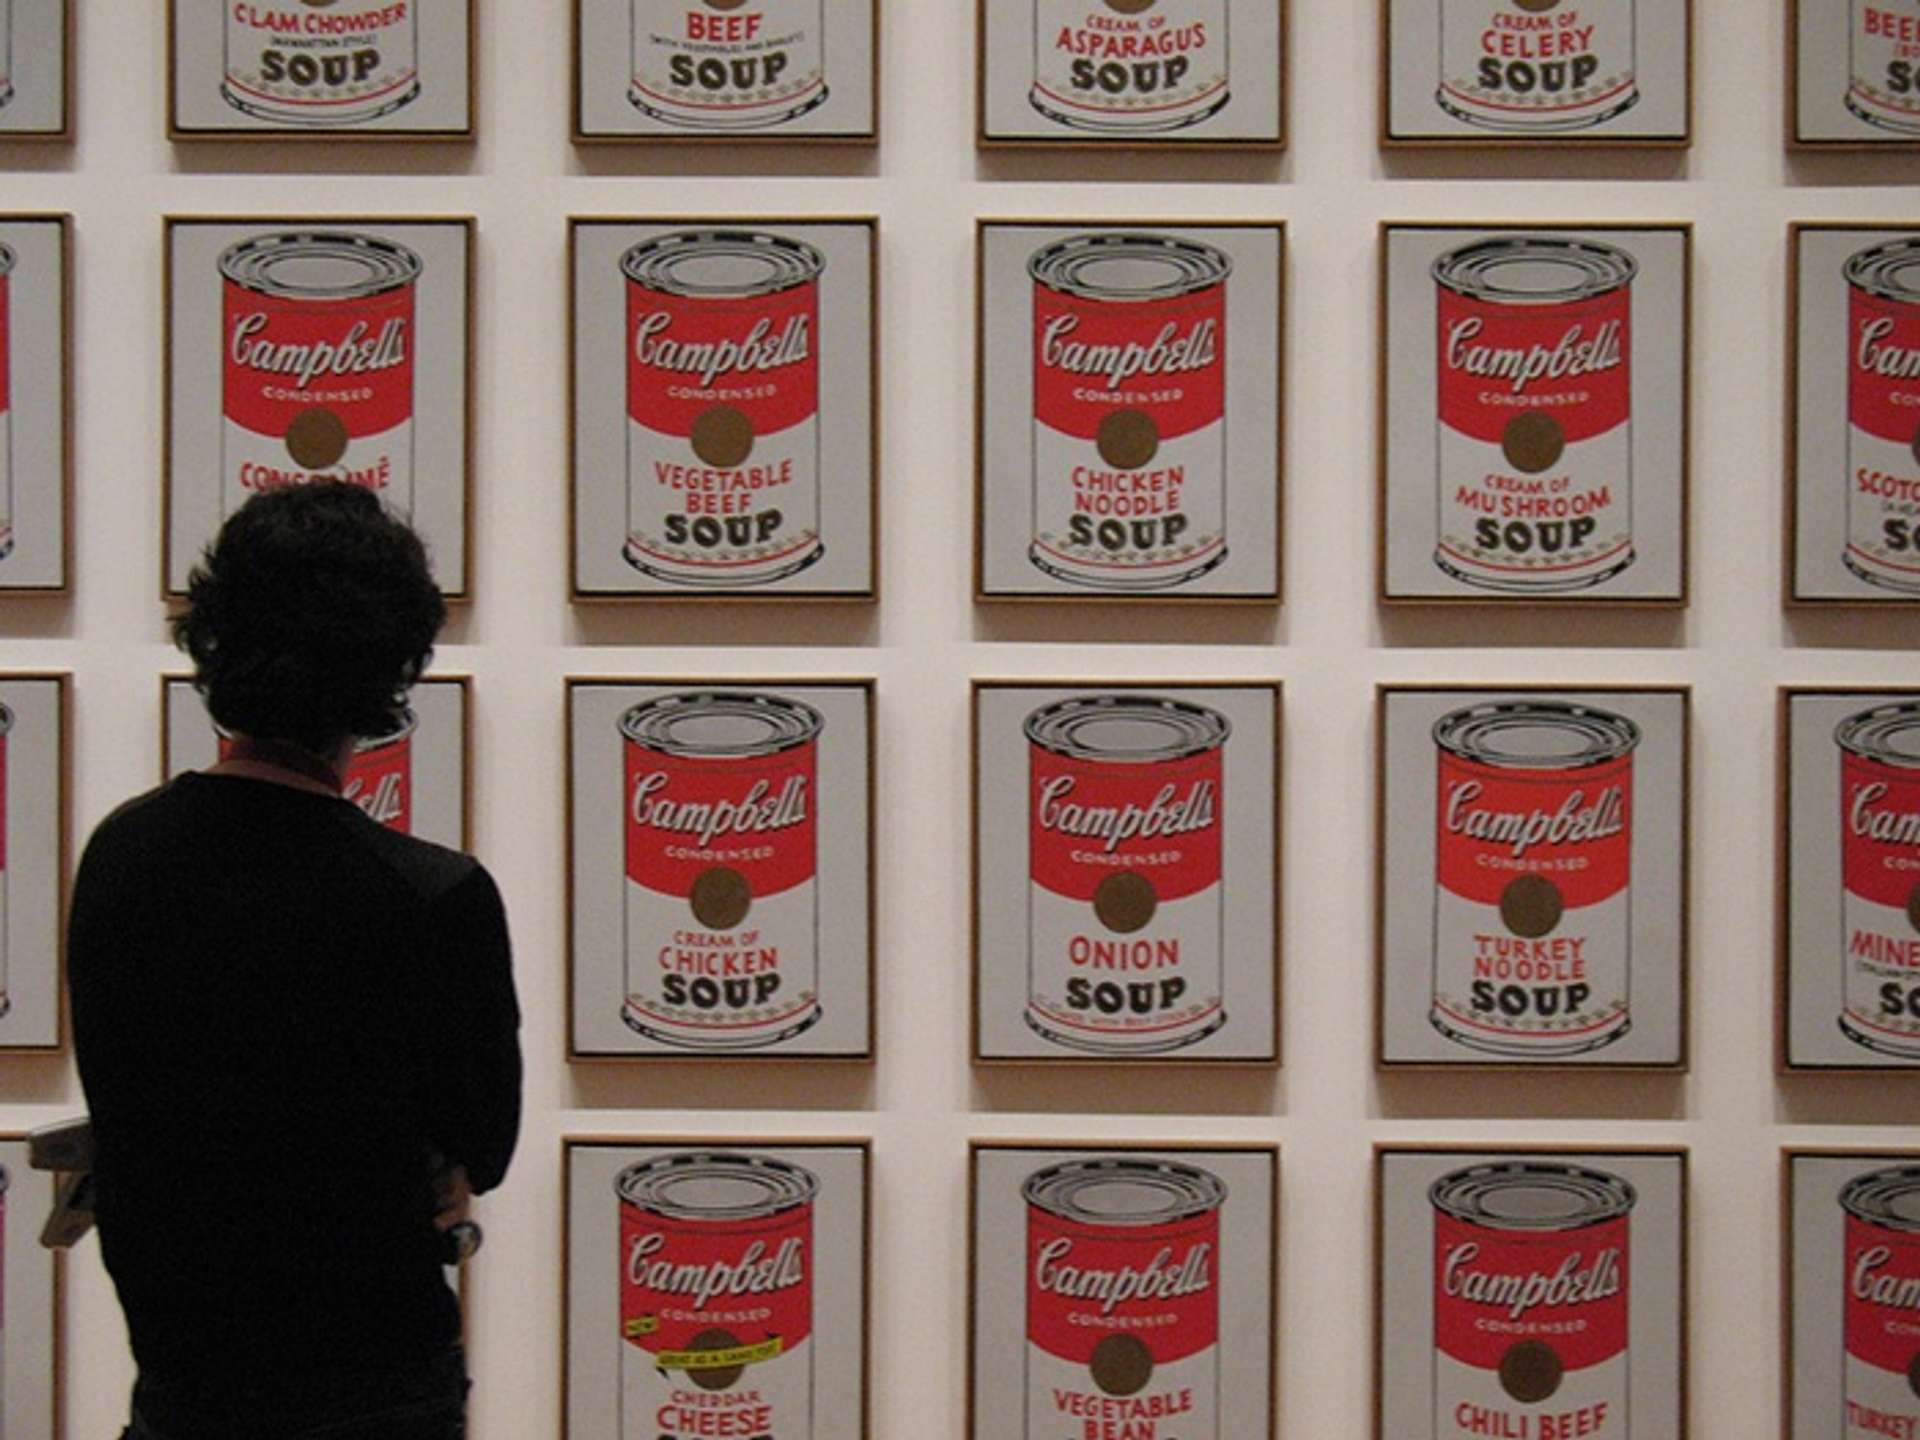 Warhol’s Campbell’s Soup Canvases by Andy Warhol